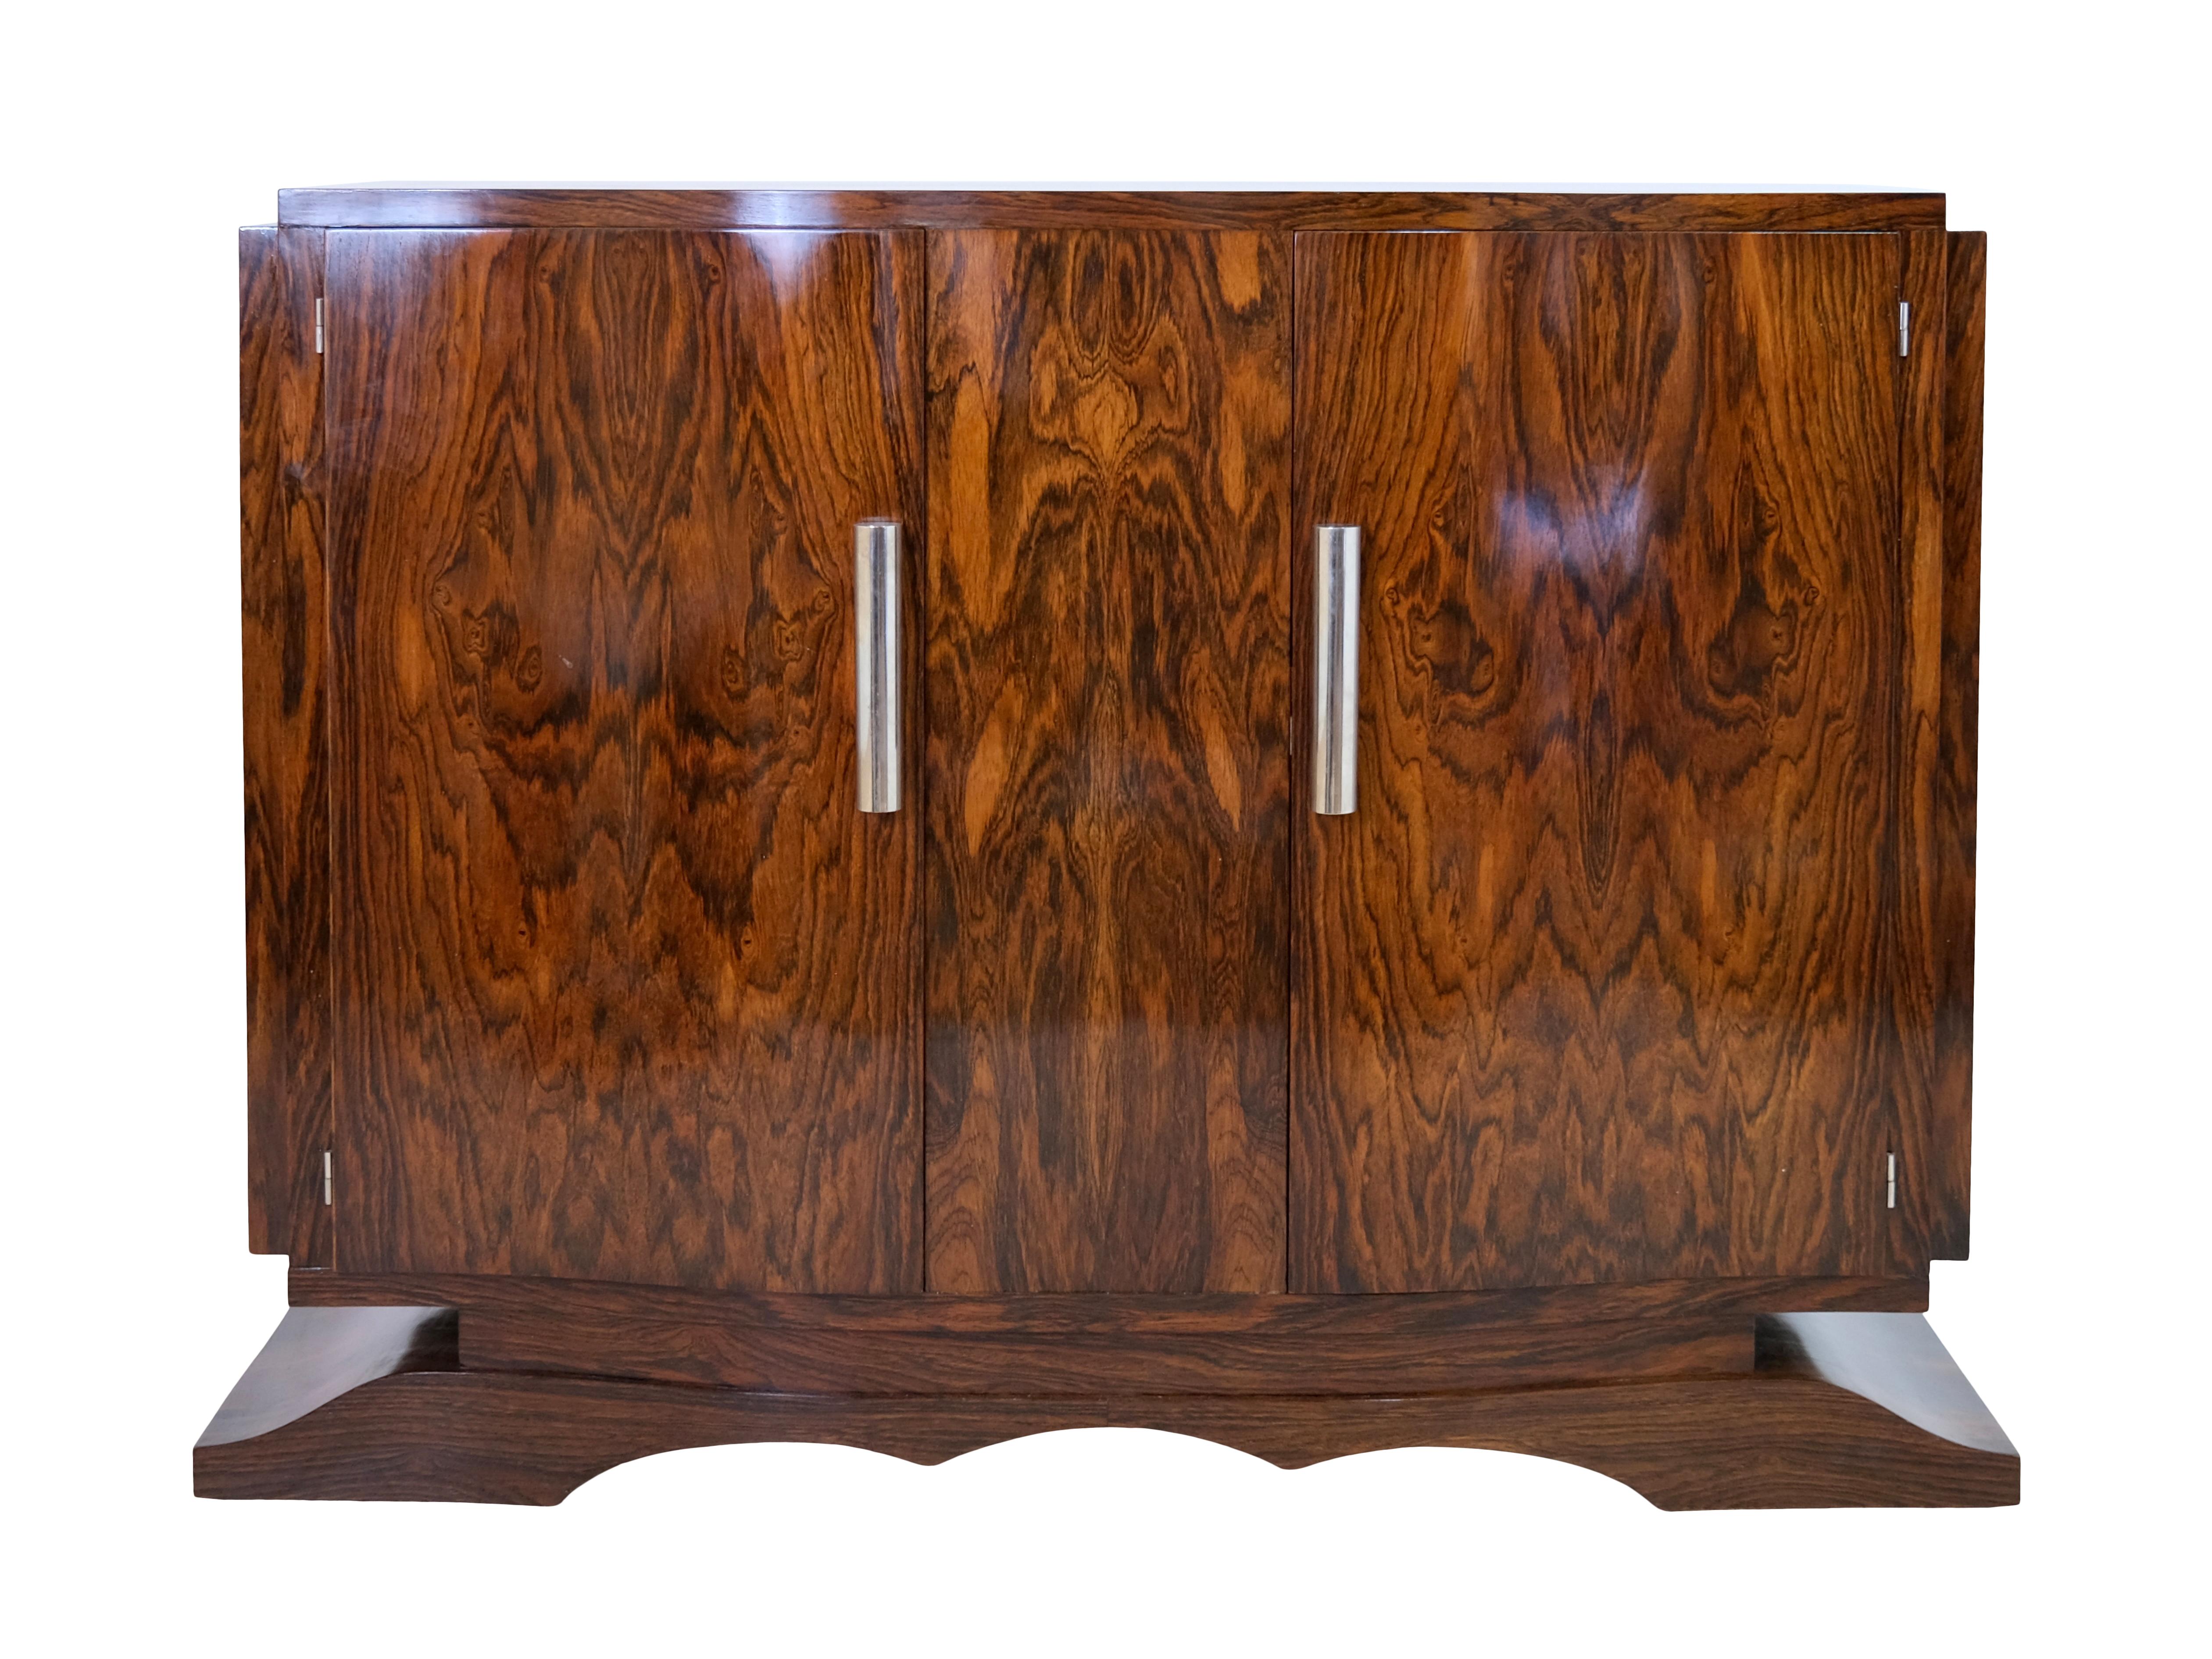 Sideboard
Caucasian nutwood, shellac hand polished
Cylindrical fittings with sliding mechanism to cover the keyholes

Original Art Deco, France 1930s

Dimensions:
Width: 127 cm
Height: 97,5 cm
Depth: 43 cm